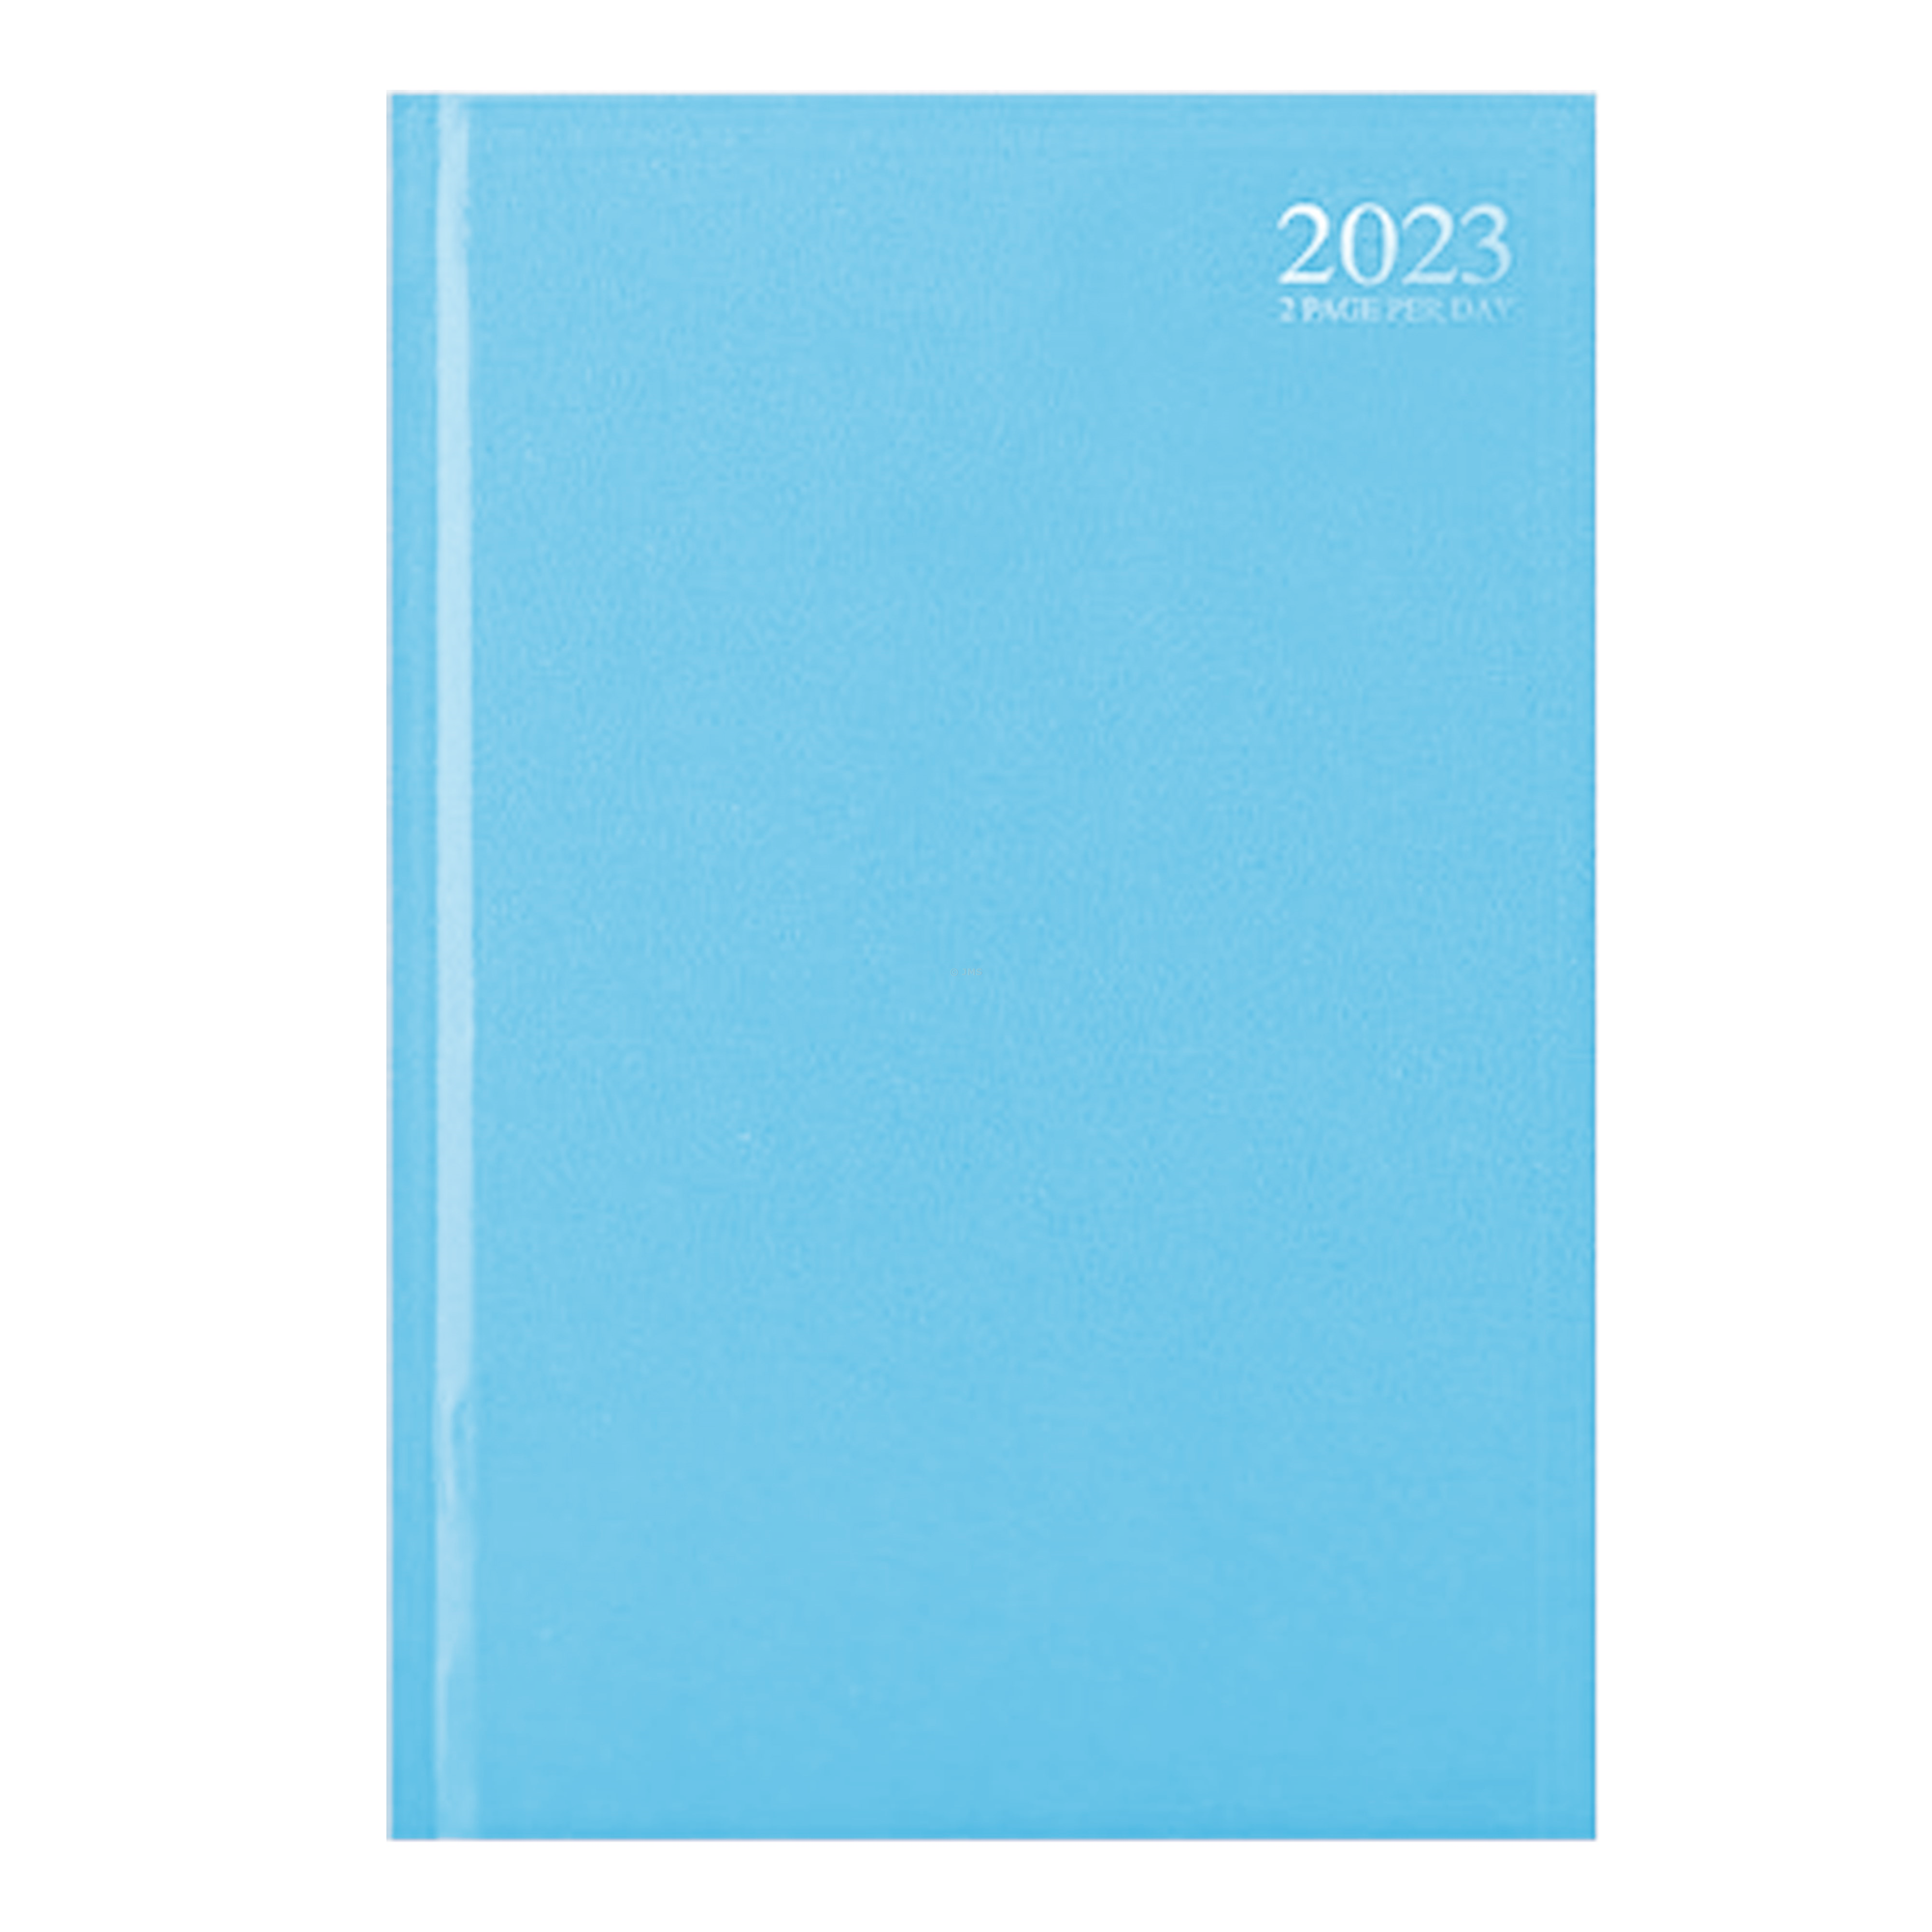 2023 A4 SKY BLUE Day A Page (2 Pages) Appointment Office Desk Diary Hardback Cover